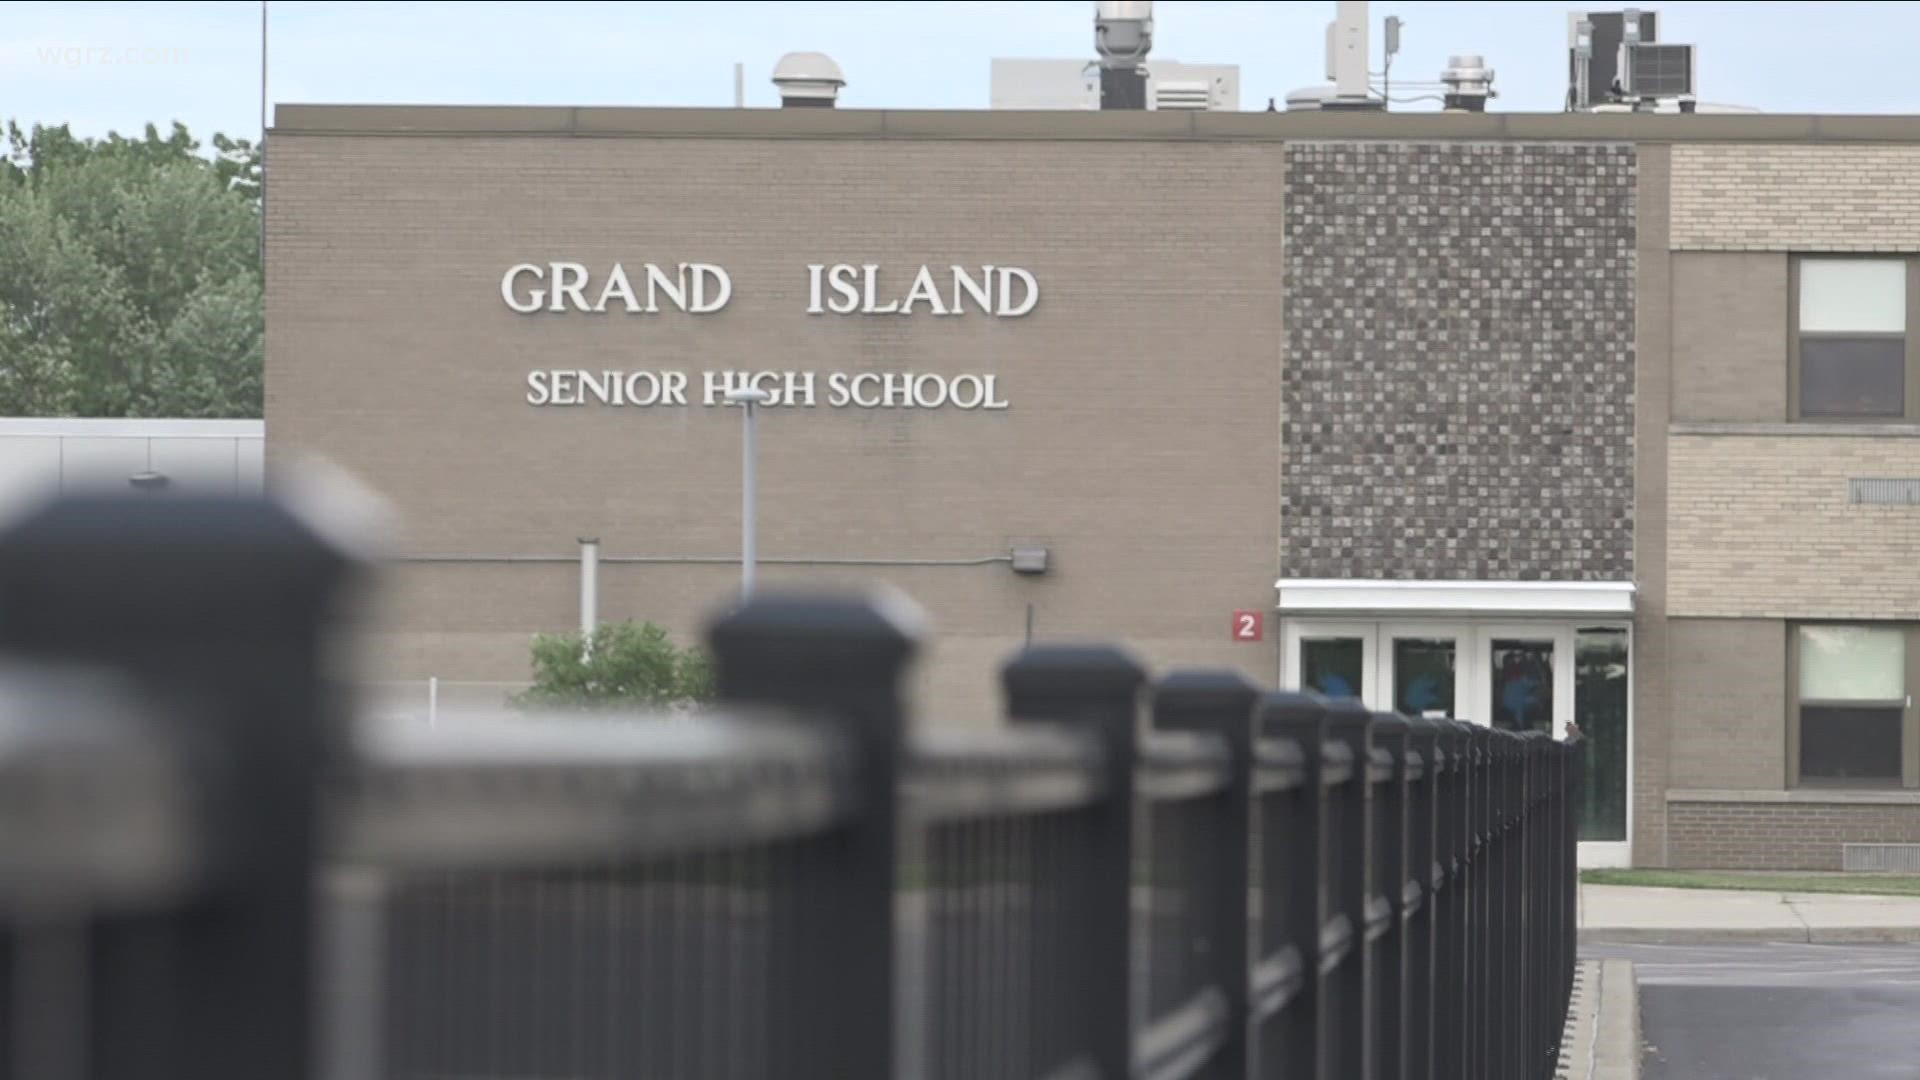 Threats were made against middle and high school girls in Grand Island. Parents were notified that girls were being asked to share nude photos over social media.